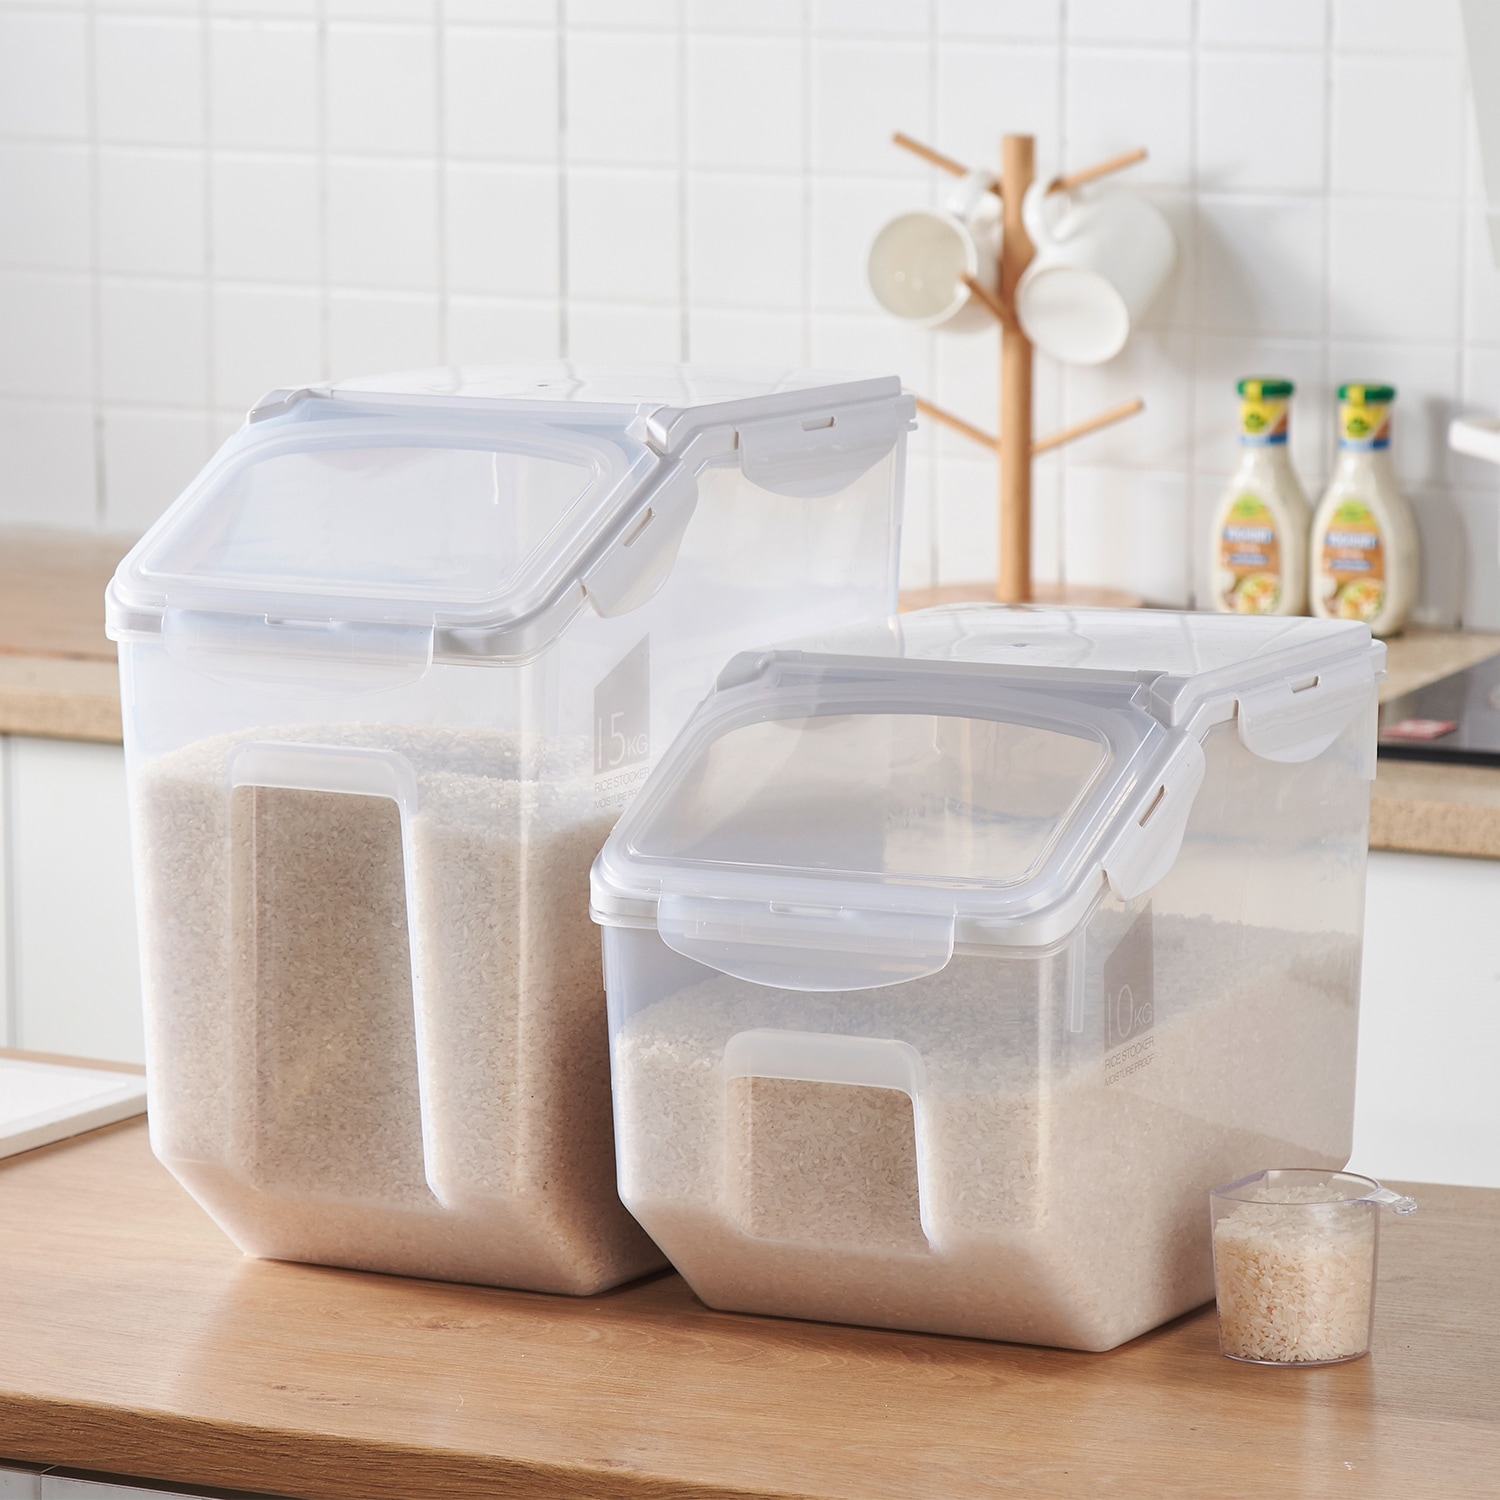 https://ak1.ostkcdn.com/images/products/is/images/direct/2e0f4b97013fb053992f7c168ac3495d79a4c125/HANAMYA-Rice-Storage-Container-with-Measuring-Cup.jpg